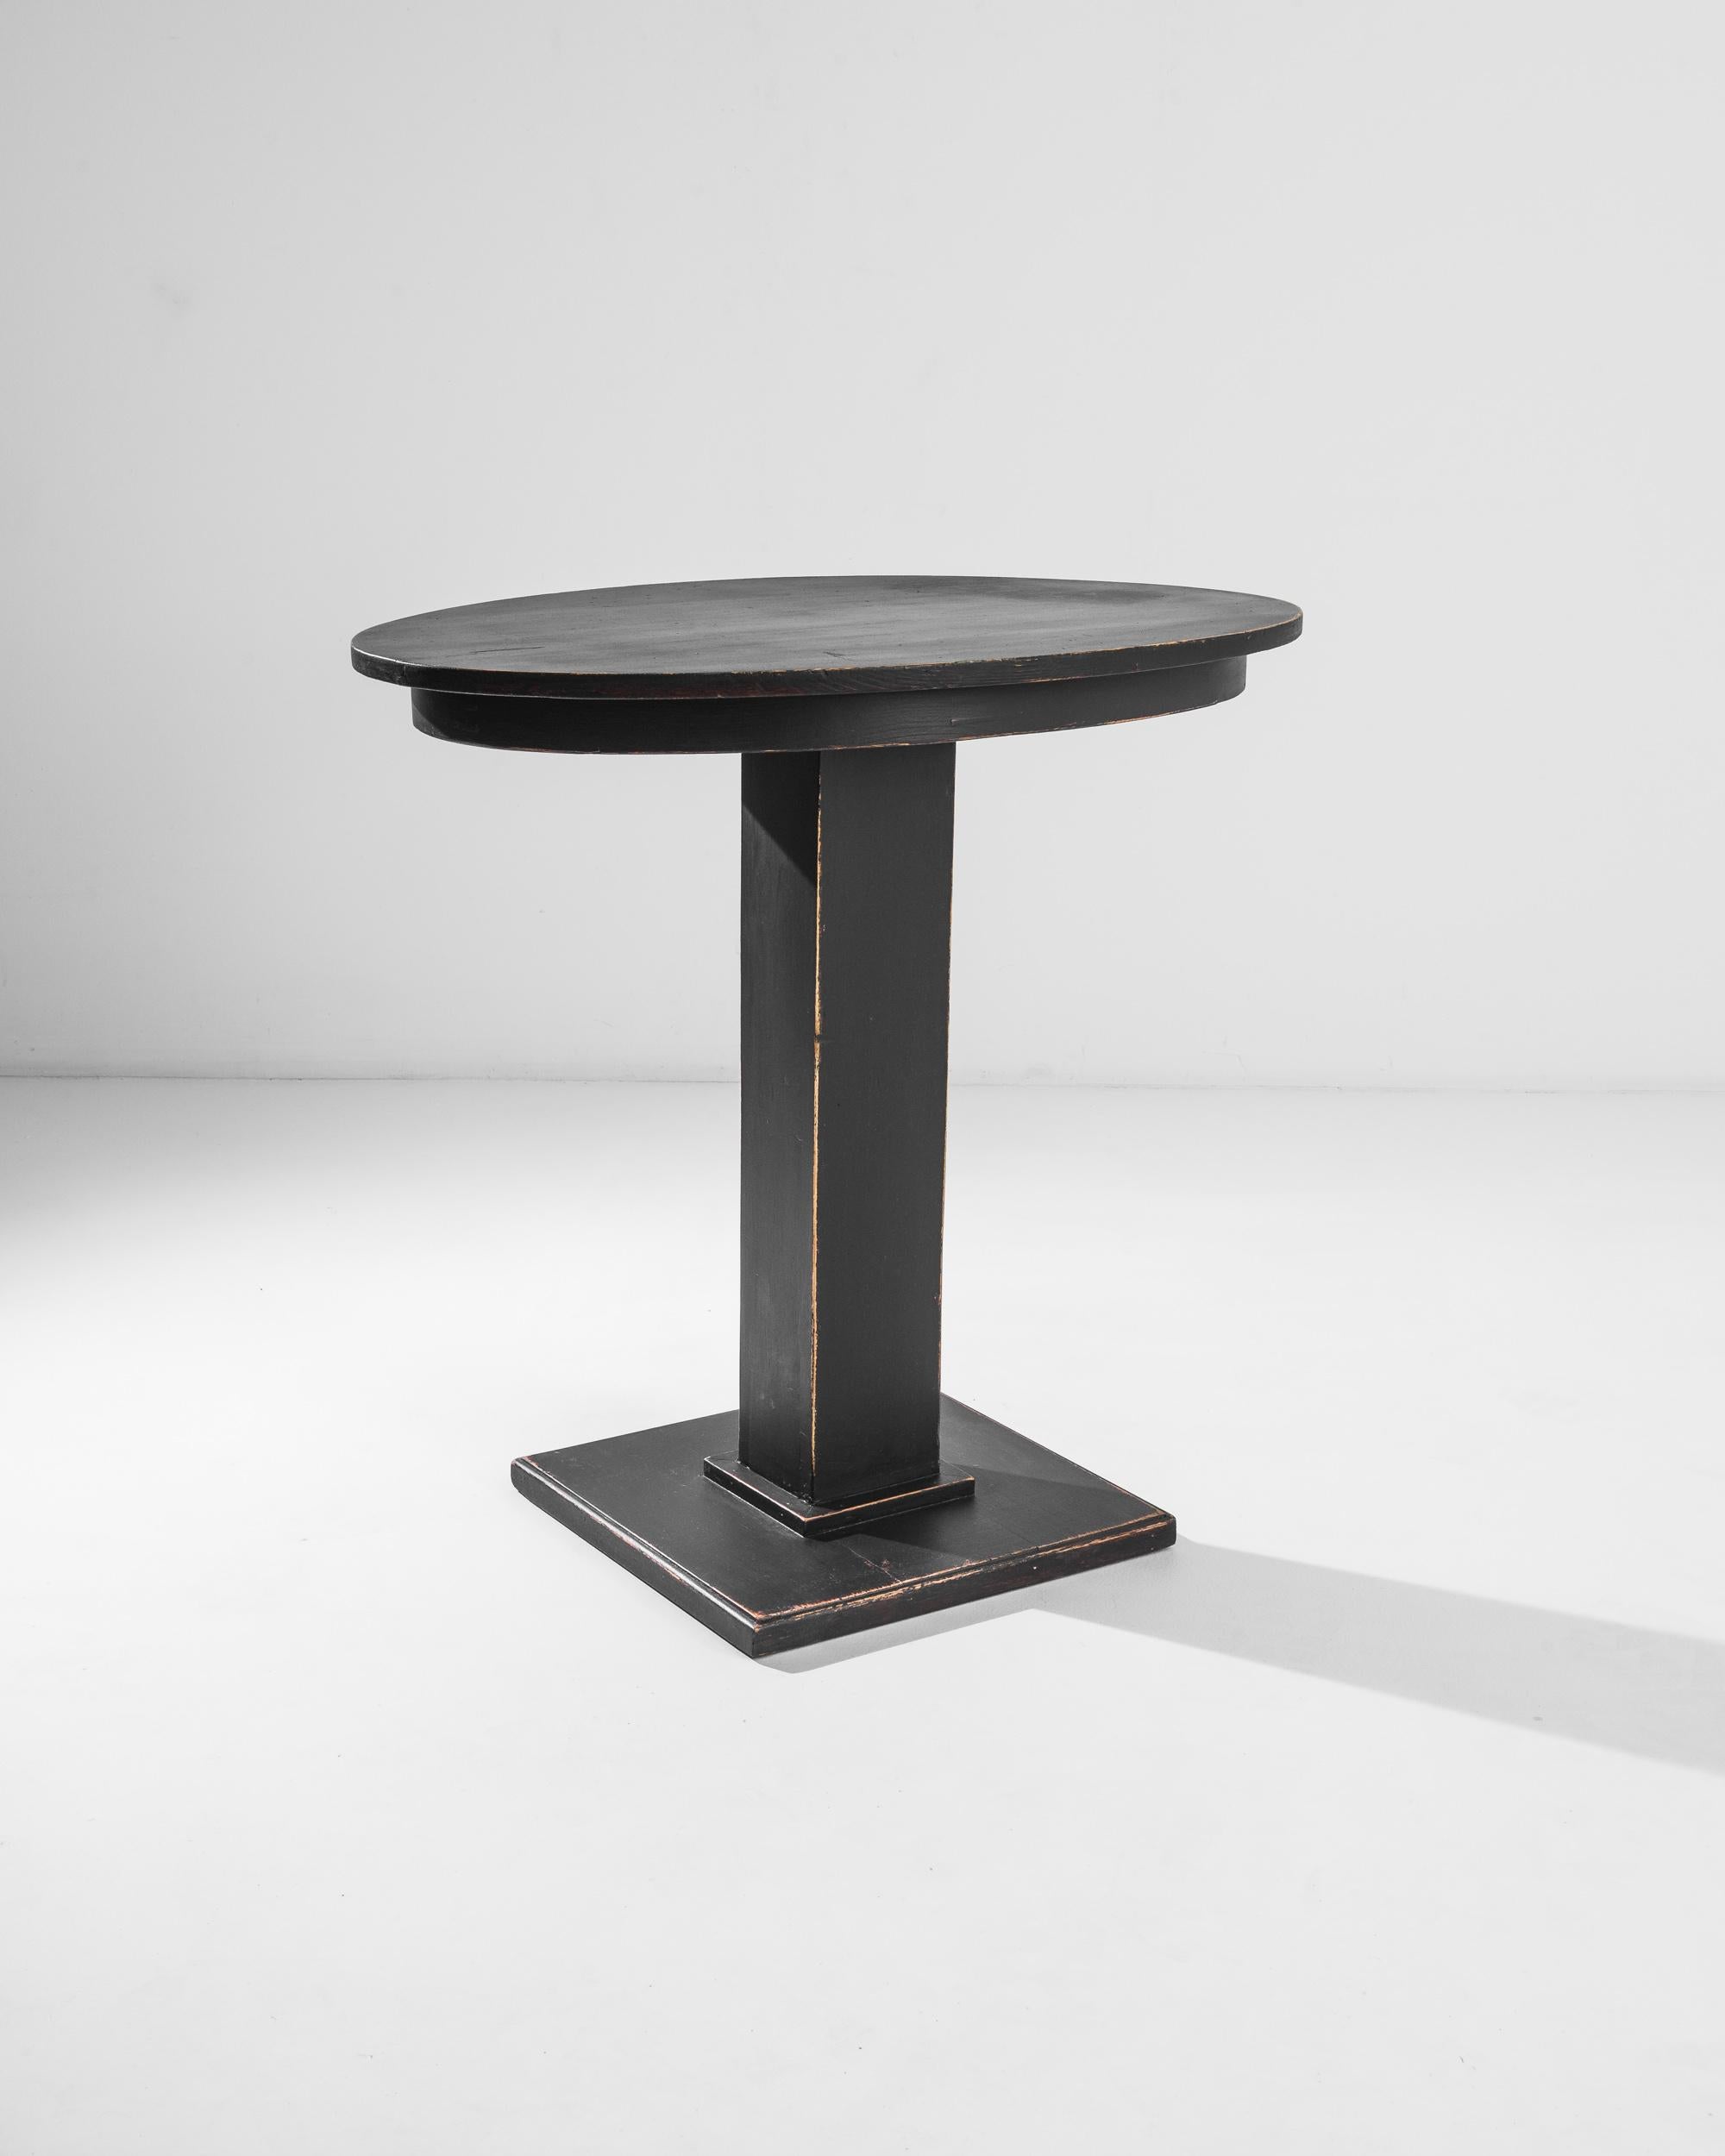 A black patinated wood side table from Central Europe, produced circa 1910. A chic side table from Central Europe, pulling styles from the past and presaging the era to come. This monochromatic stripping down to bare essentials, a table is a